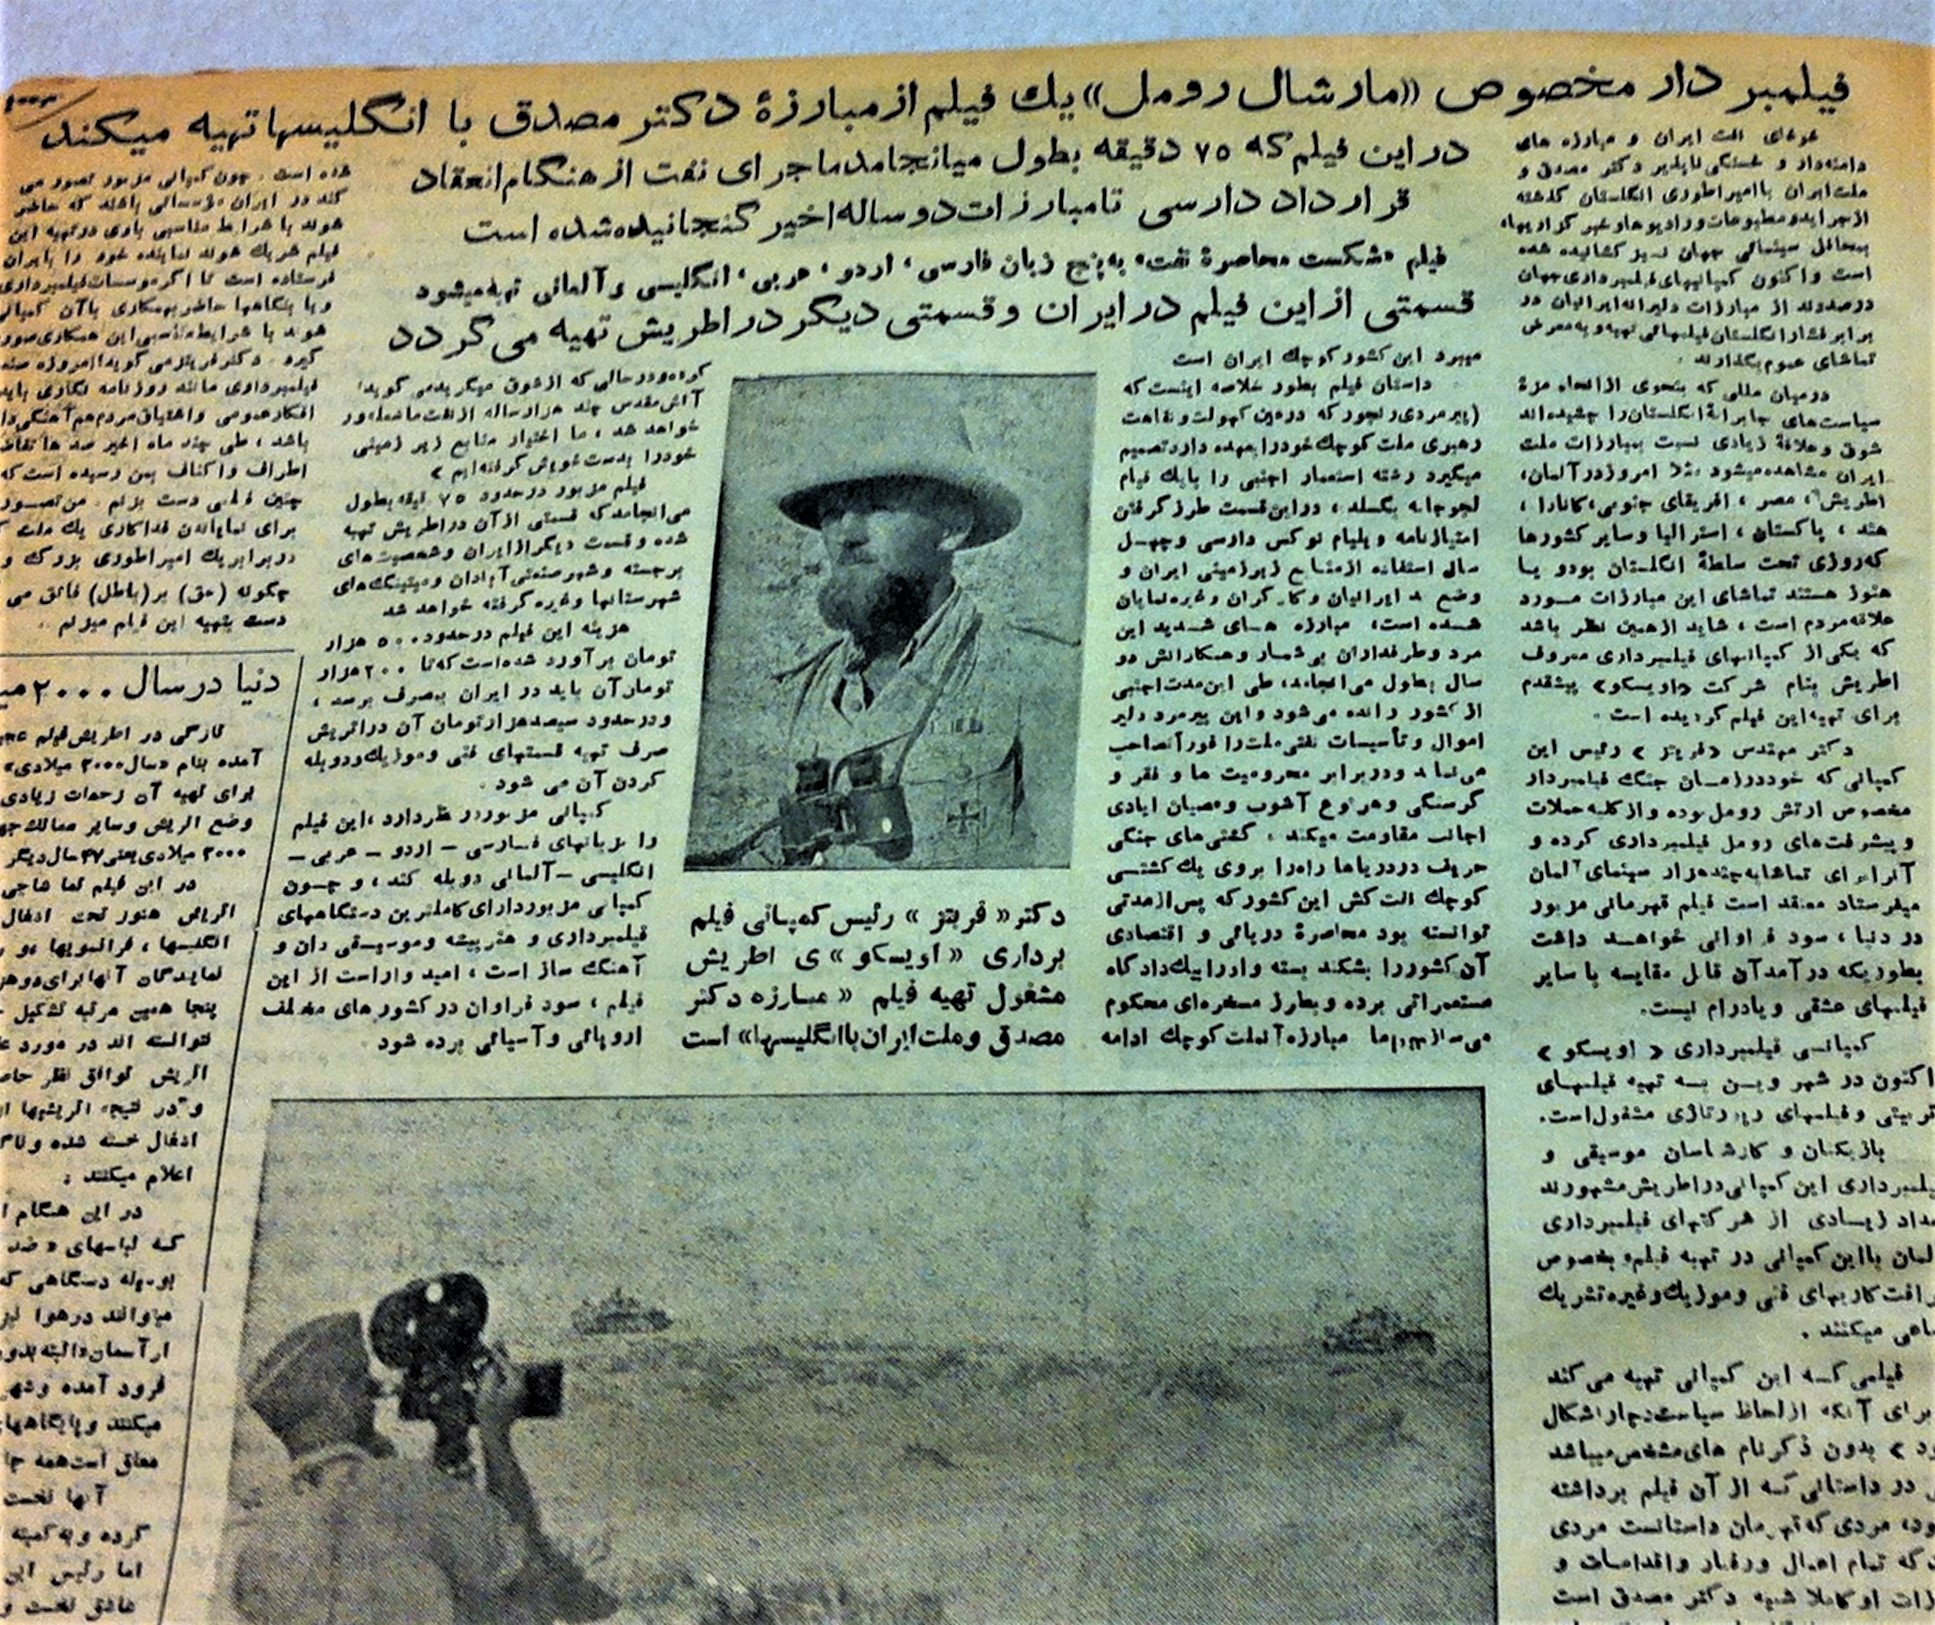 Newspaper article, reporting on a planned film project of Marshall Erwin Rommel's private photographer